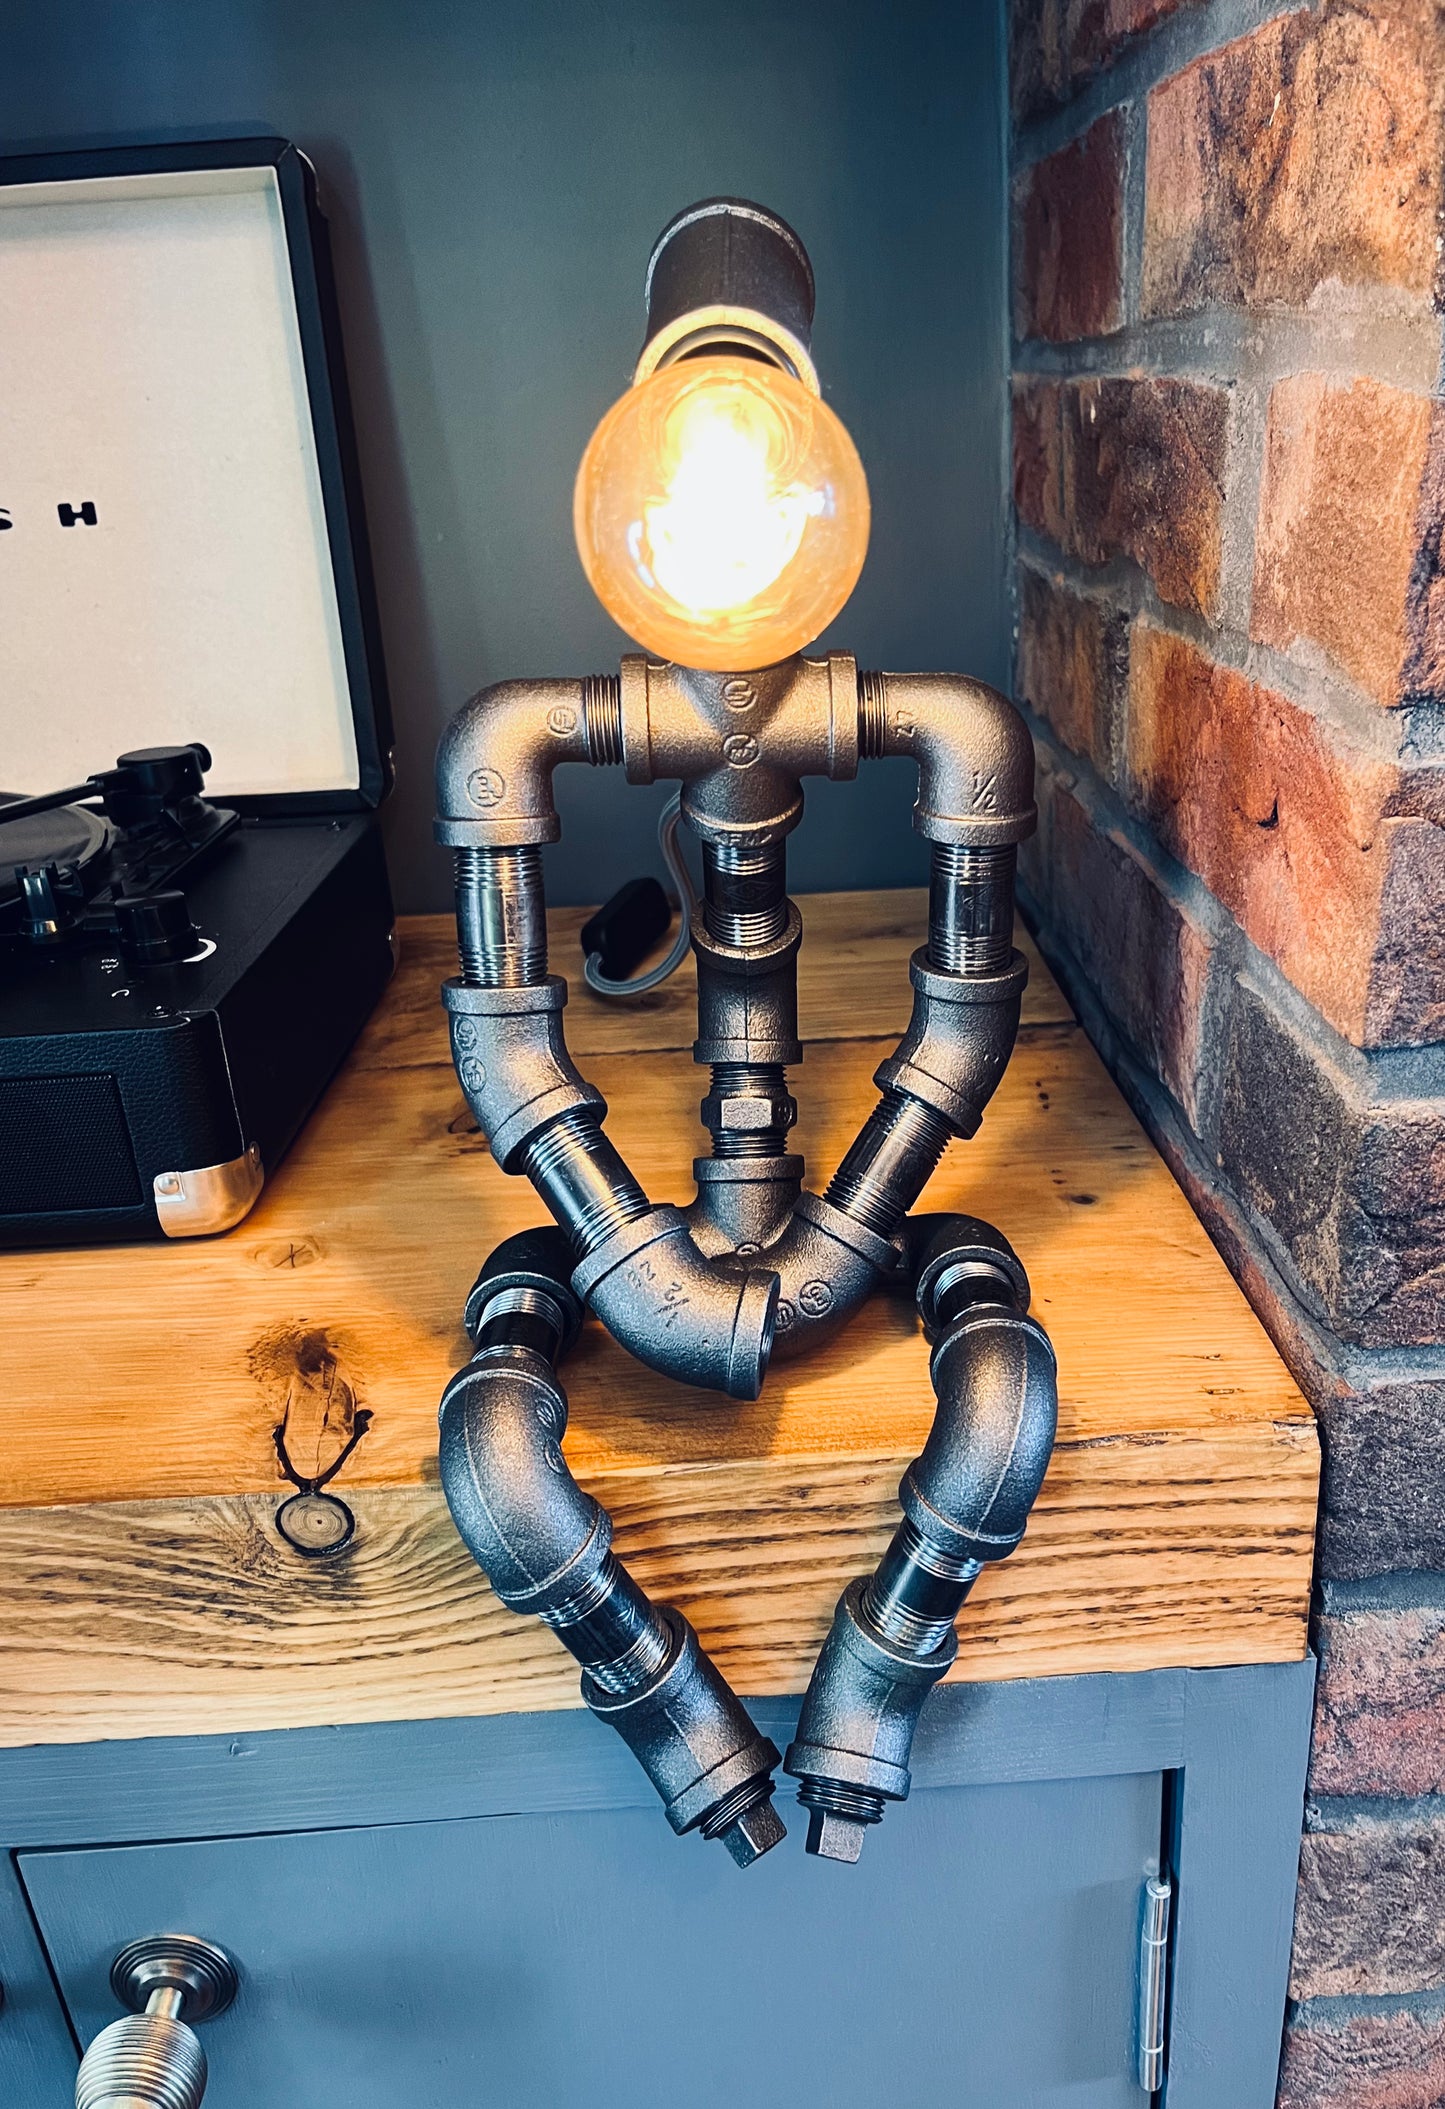 The Pensive Man Industrial Iron Pipe Man Robot Lamp & Vintage Bulb